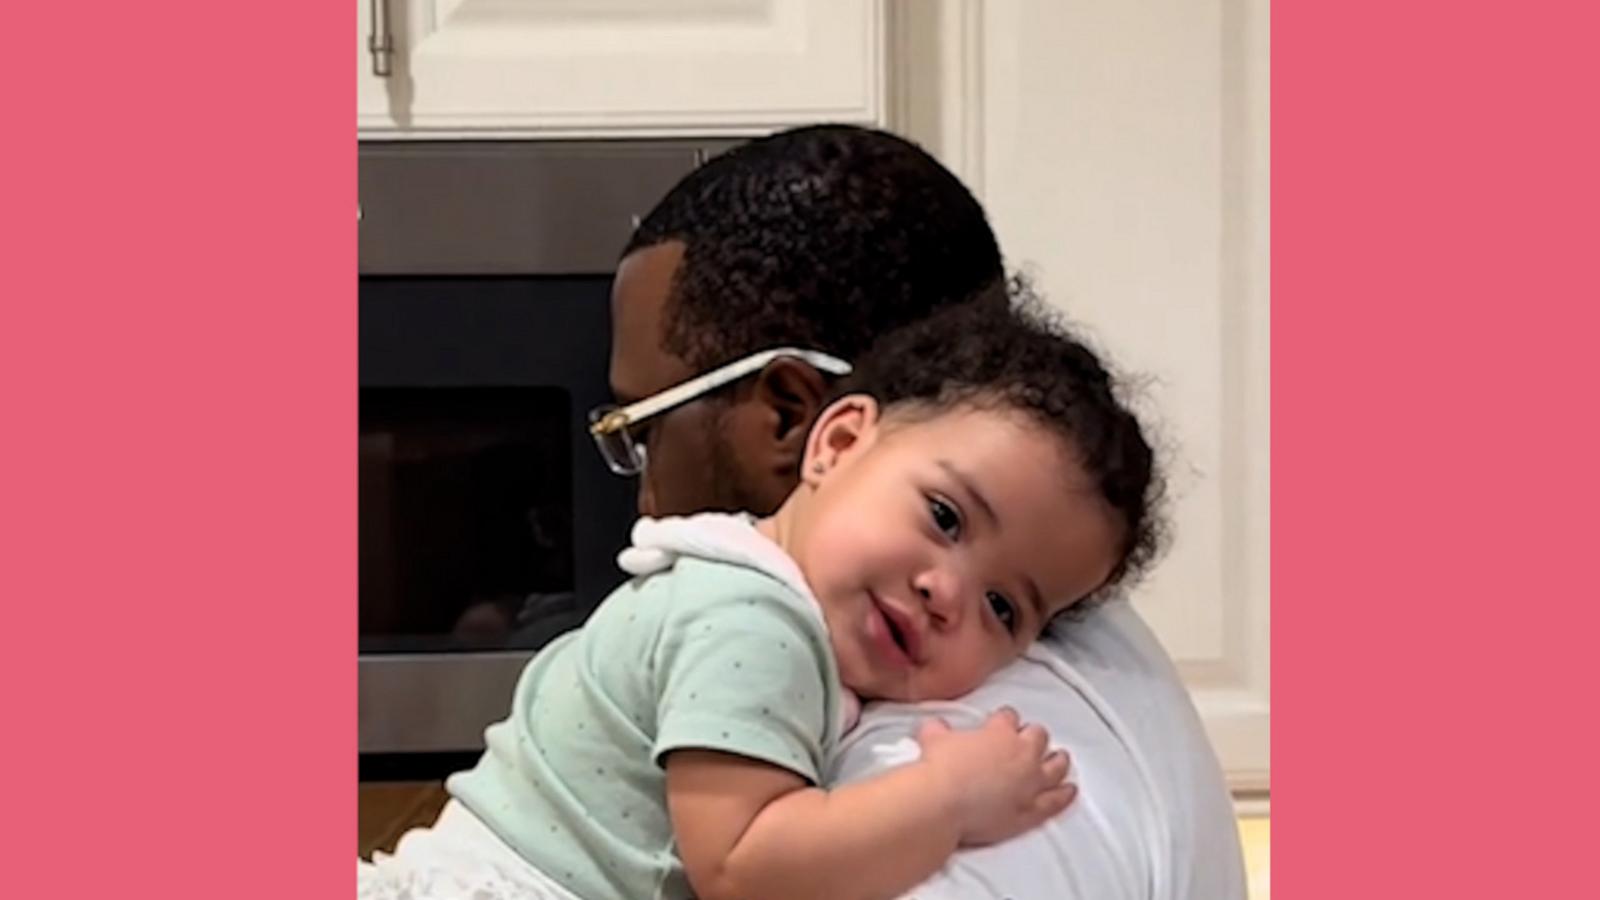 VIDEO: Baby girl loves to cook with her dad